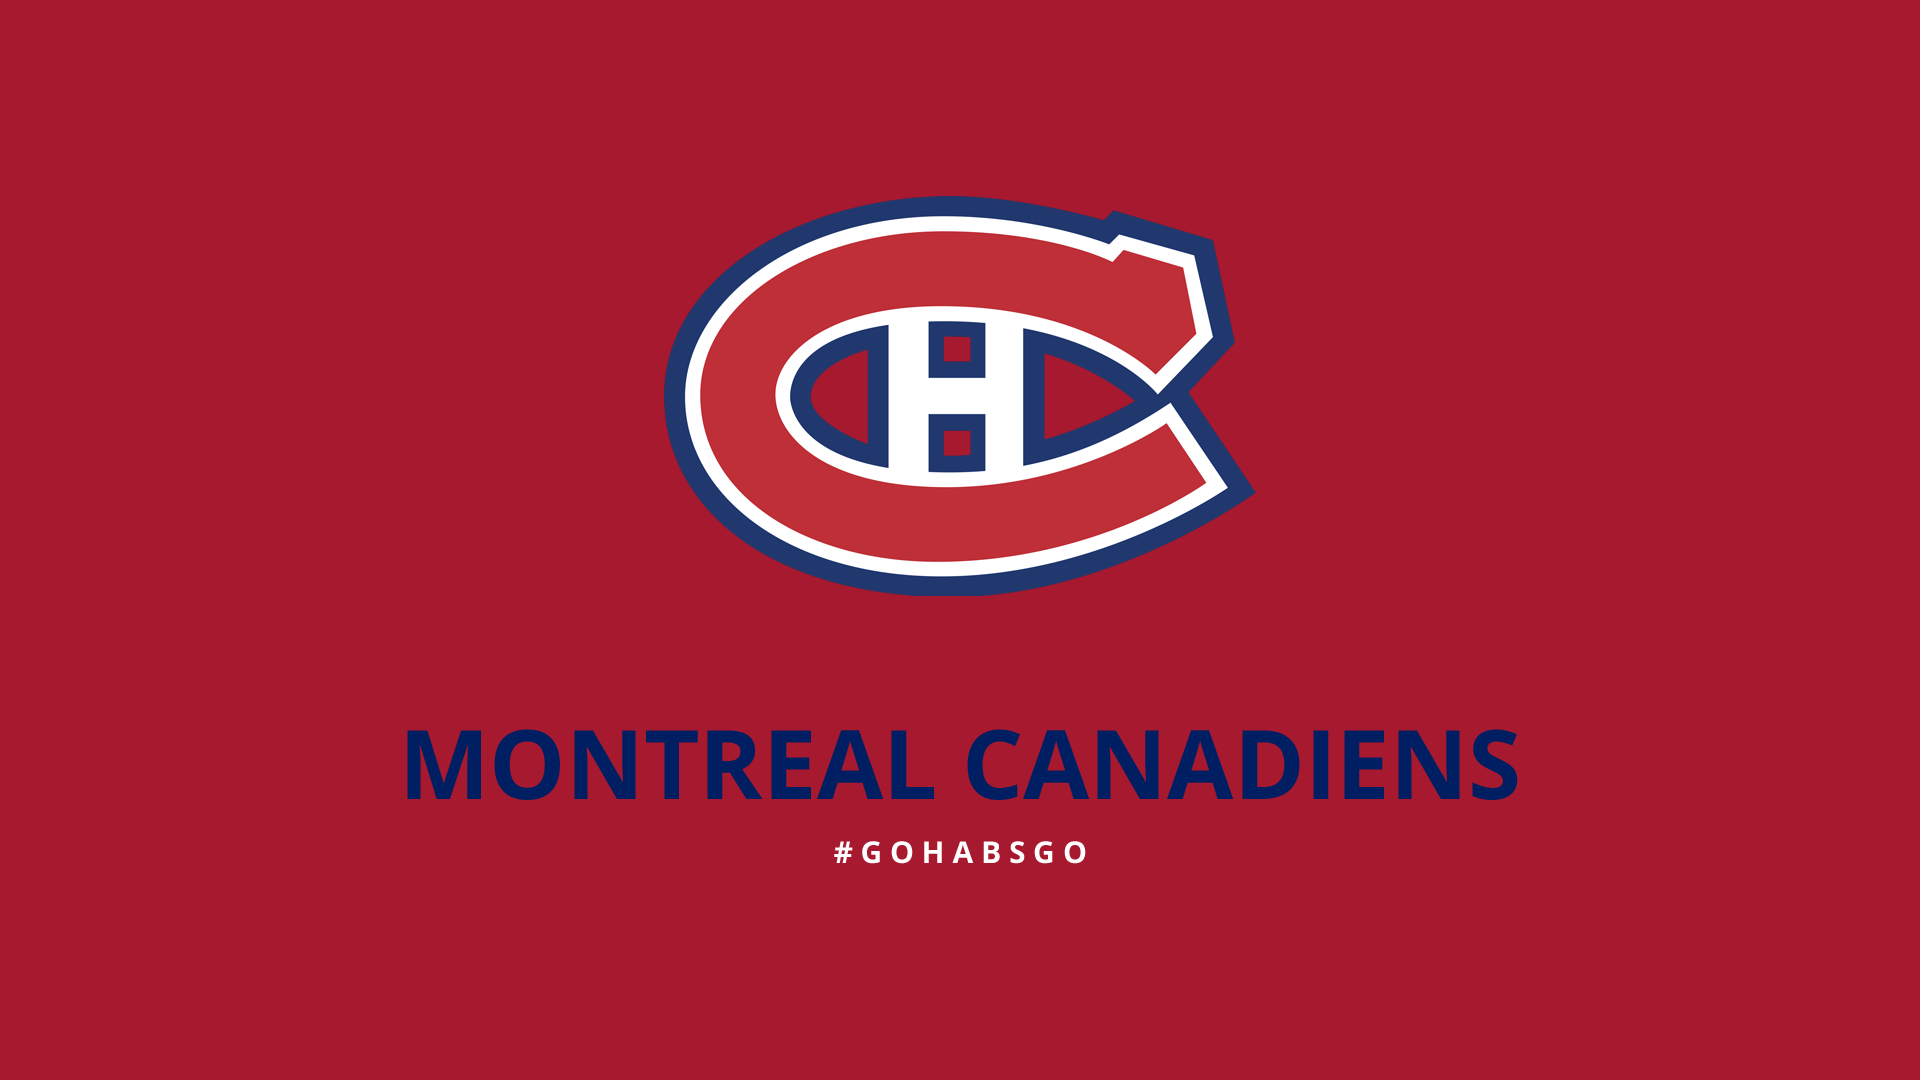 Minimalist Montreal Canadiens Wallpaper By Lfiore